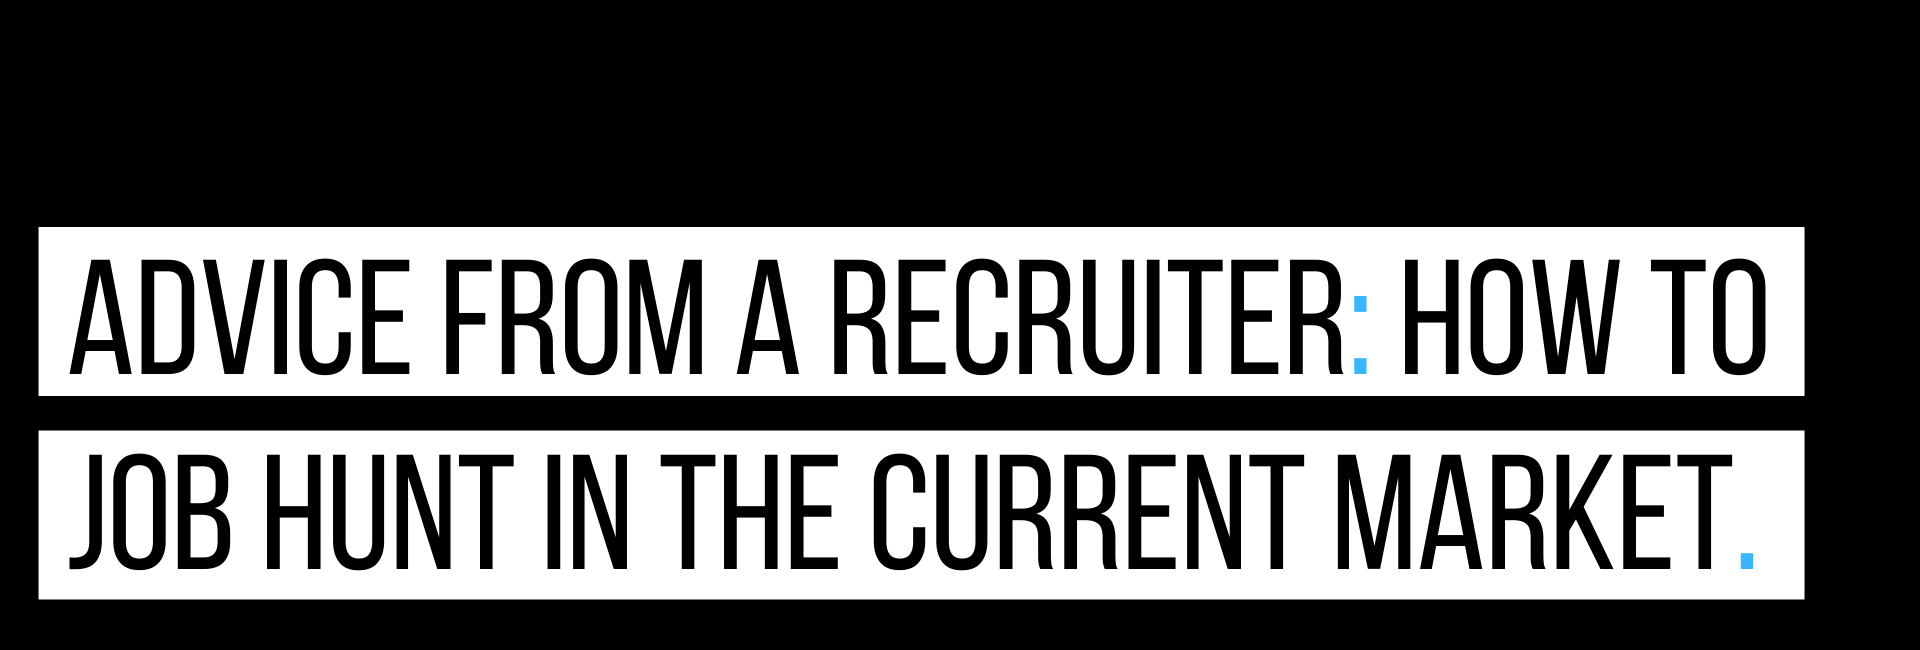 Advice from a Recruiter: How to job hunt in the current market